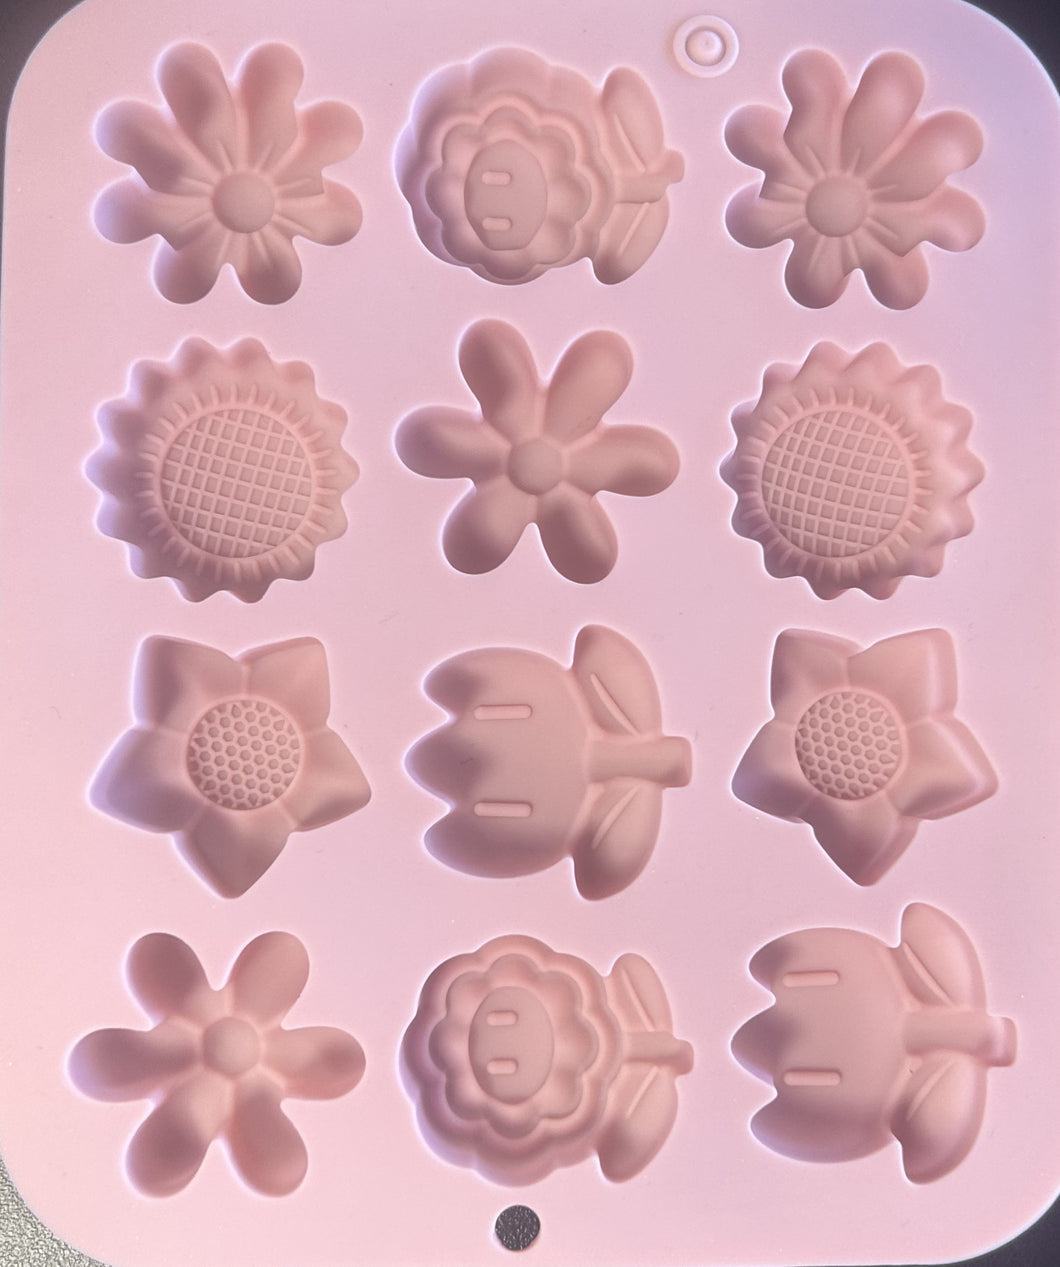 Silicone Mold- Flowers $6.99